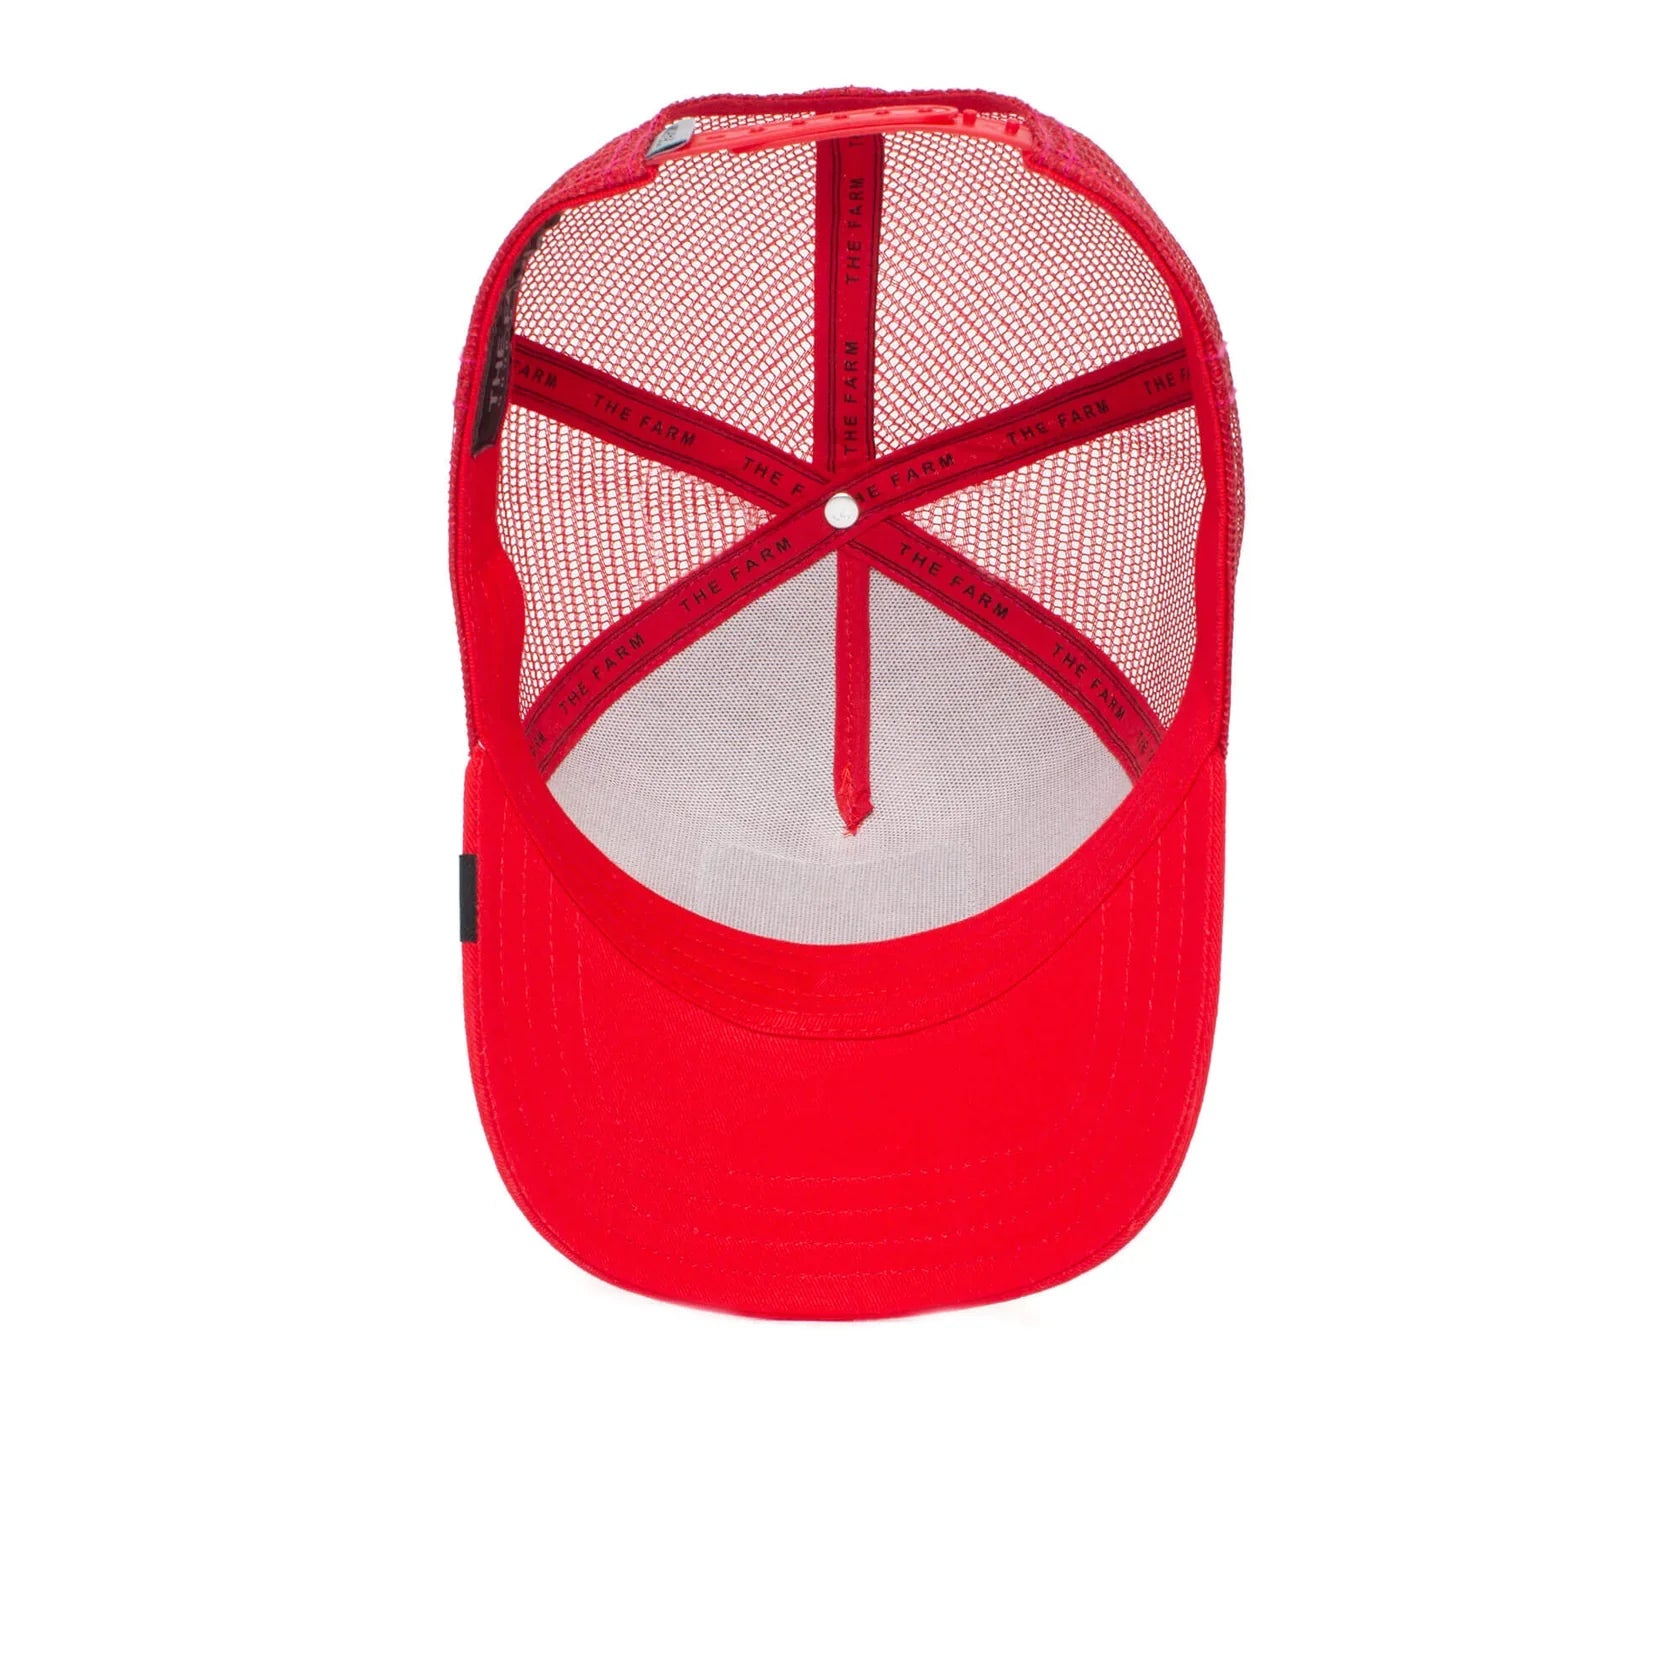 'Goorin Bros. The Cock Trucker Hat' in 'Red' colour